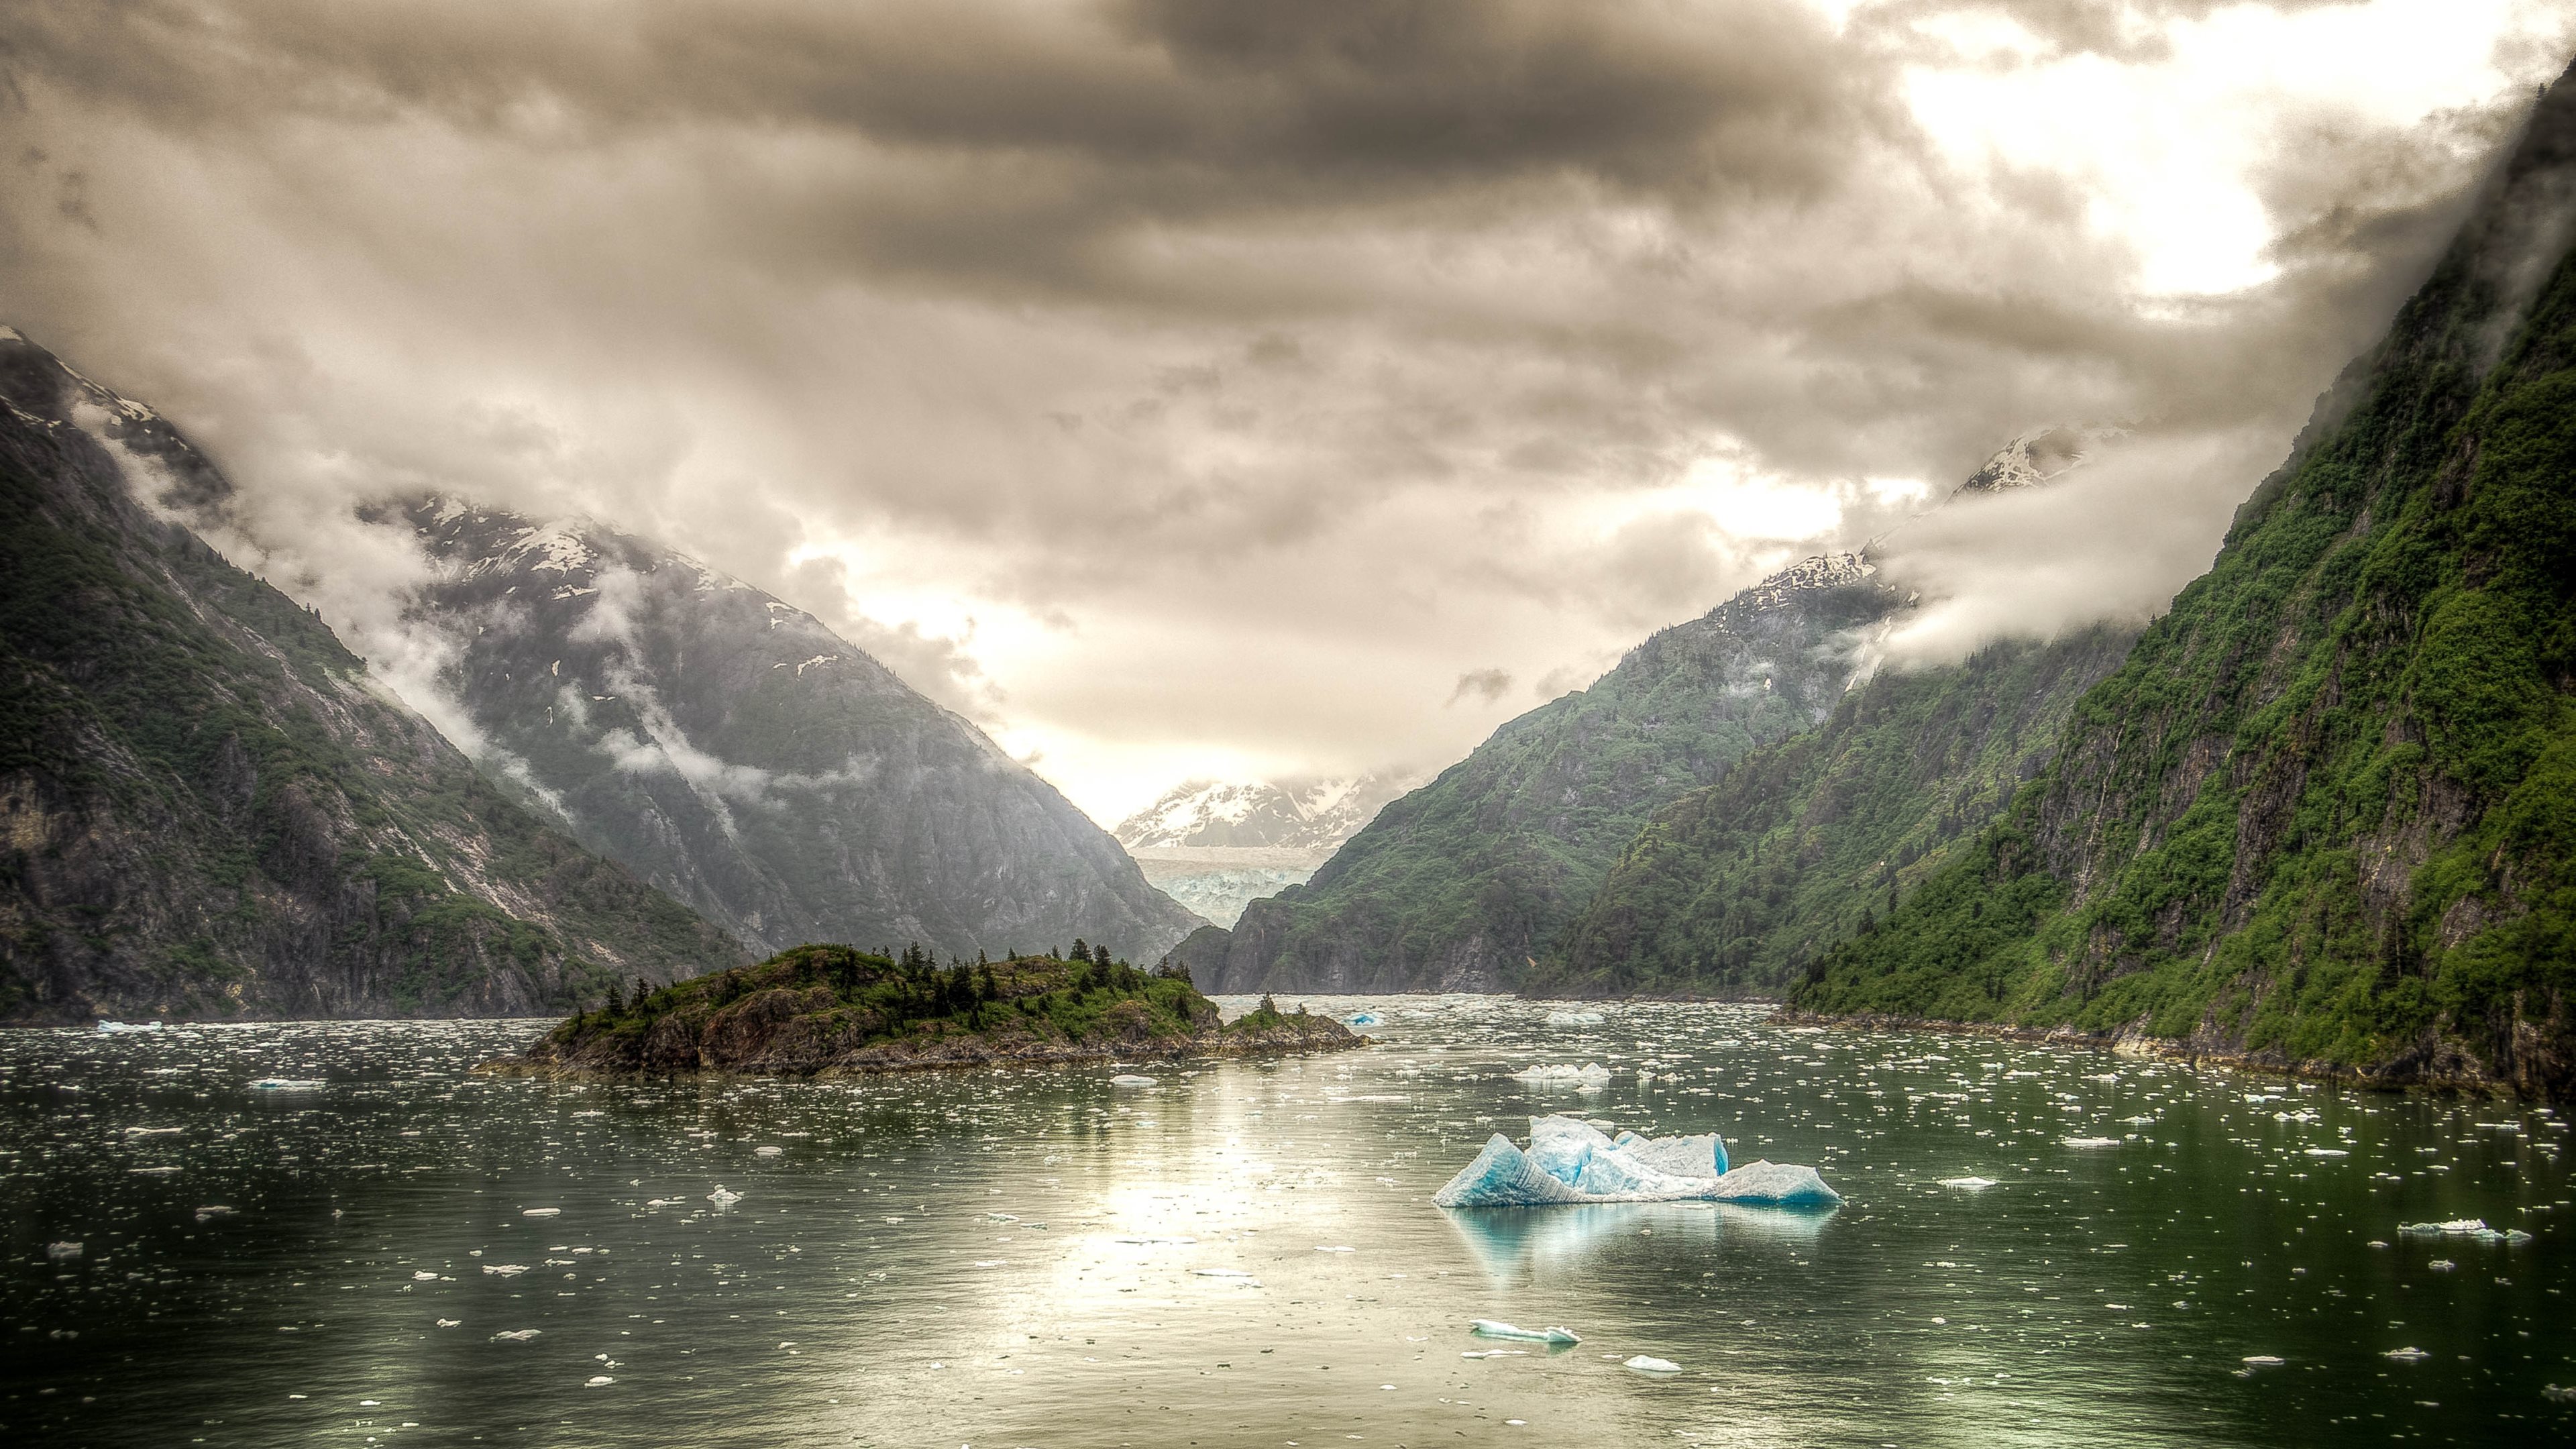 With The Tracy Arm Fjord From Alaska Nature Looks Always Marvelous